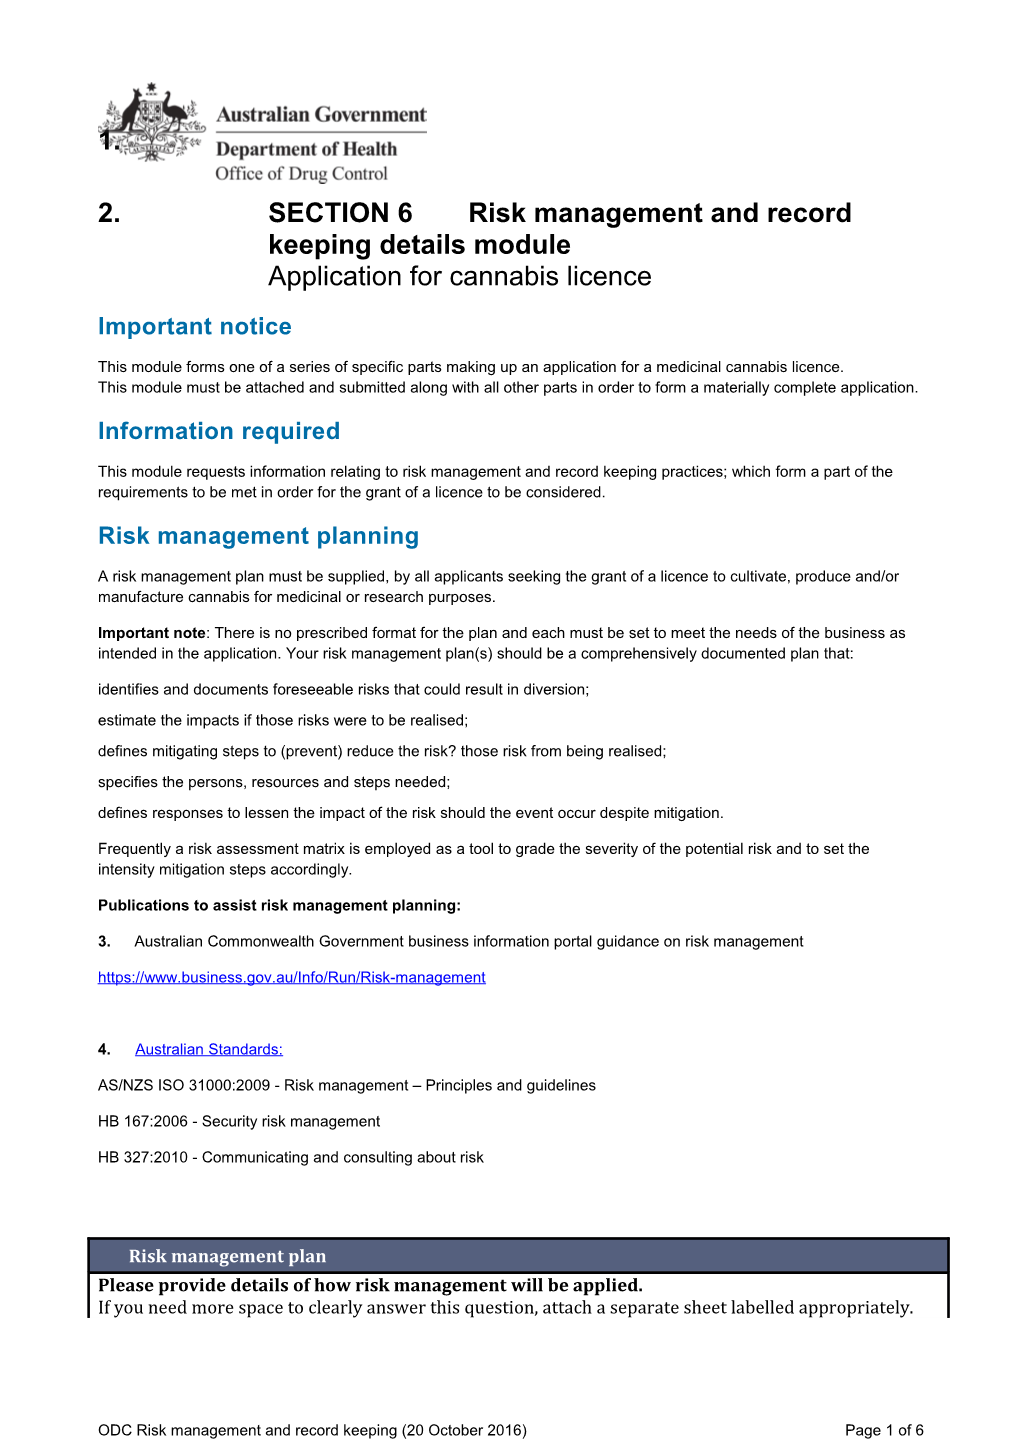 SECTION 6 Risk Management and Record Keeping Details Module